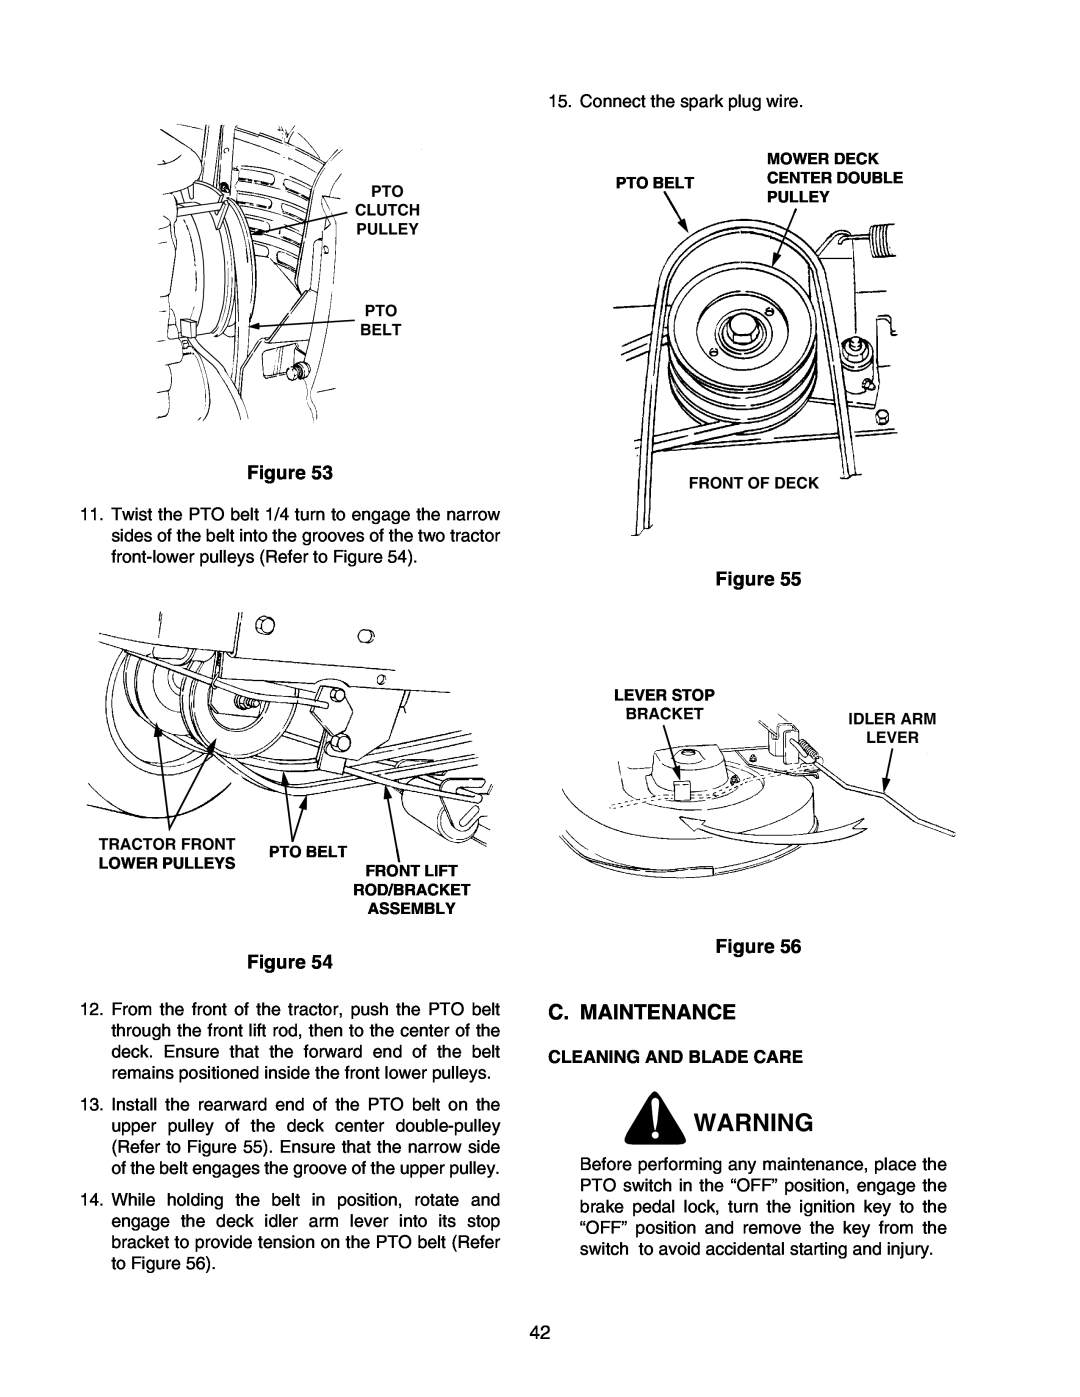 Cub Cadet 2176 manual C. Maintenance, Cleaning And Blade Care 